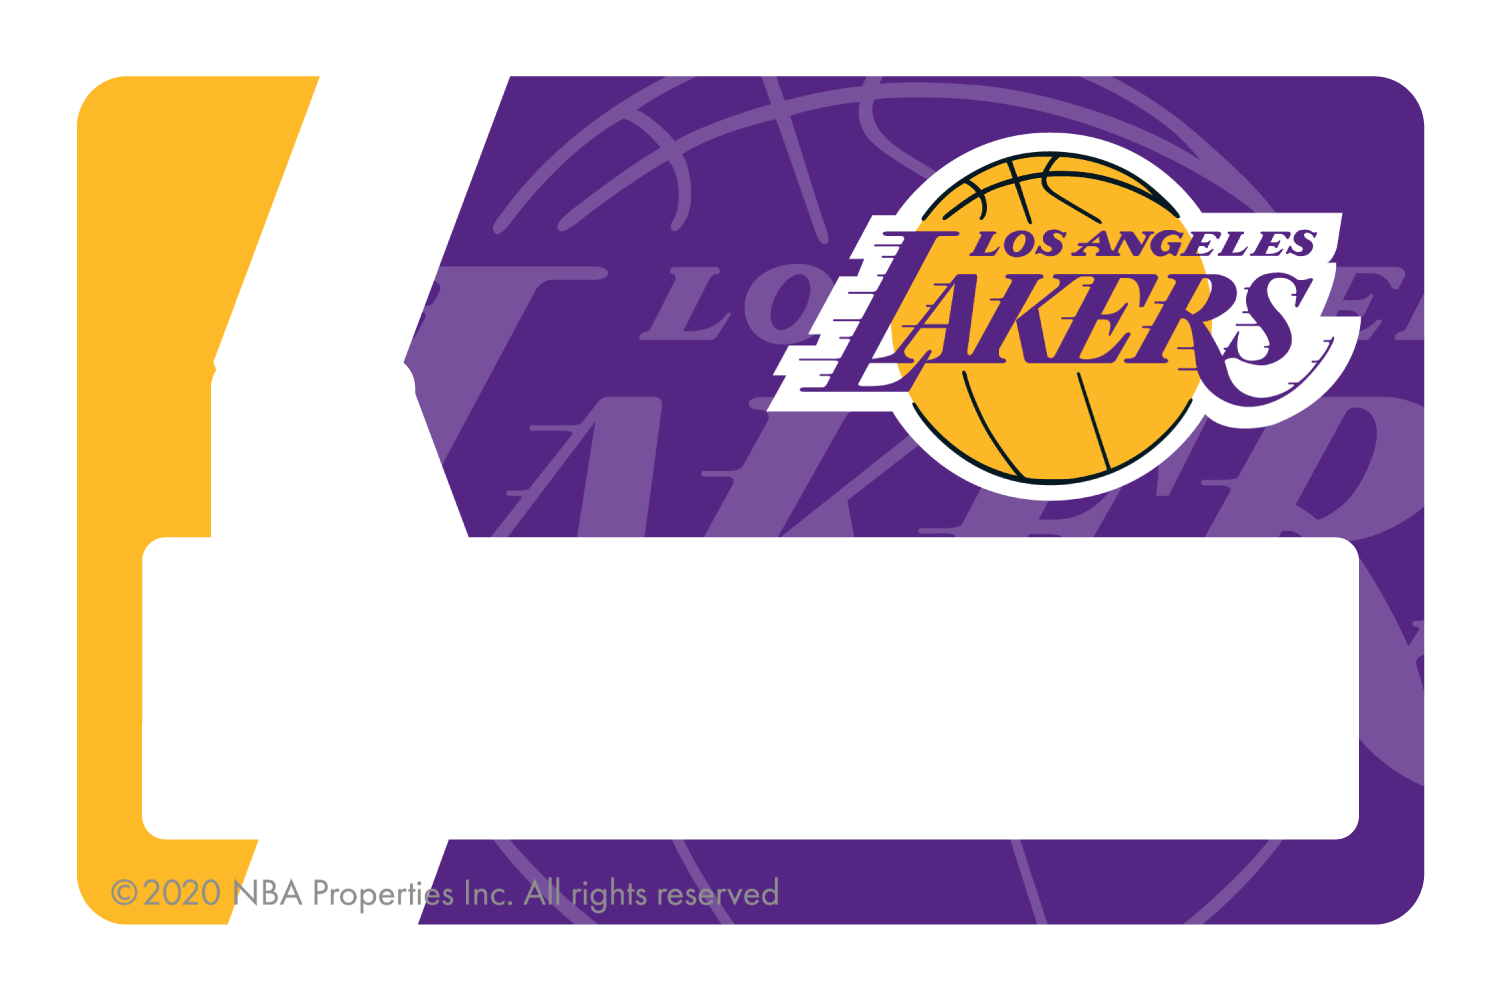 Los Angeles Lakers: Crossover